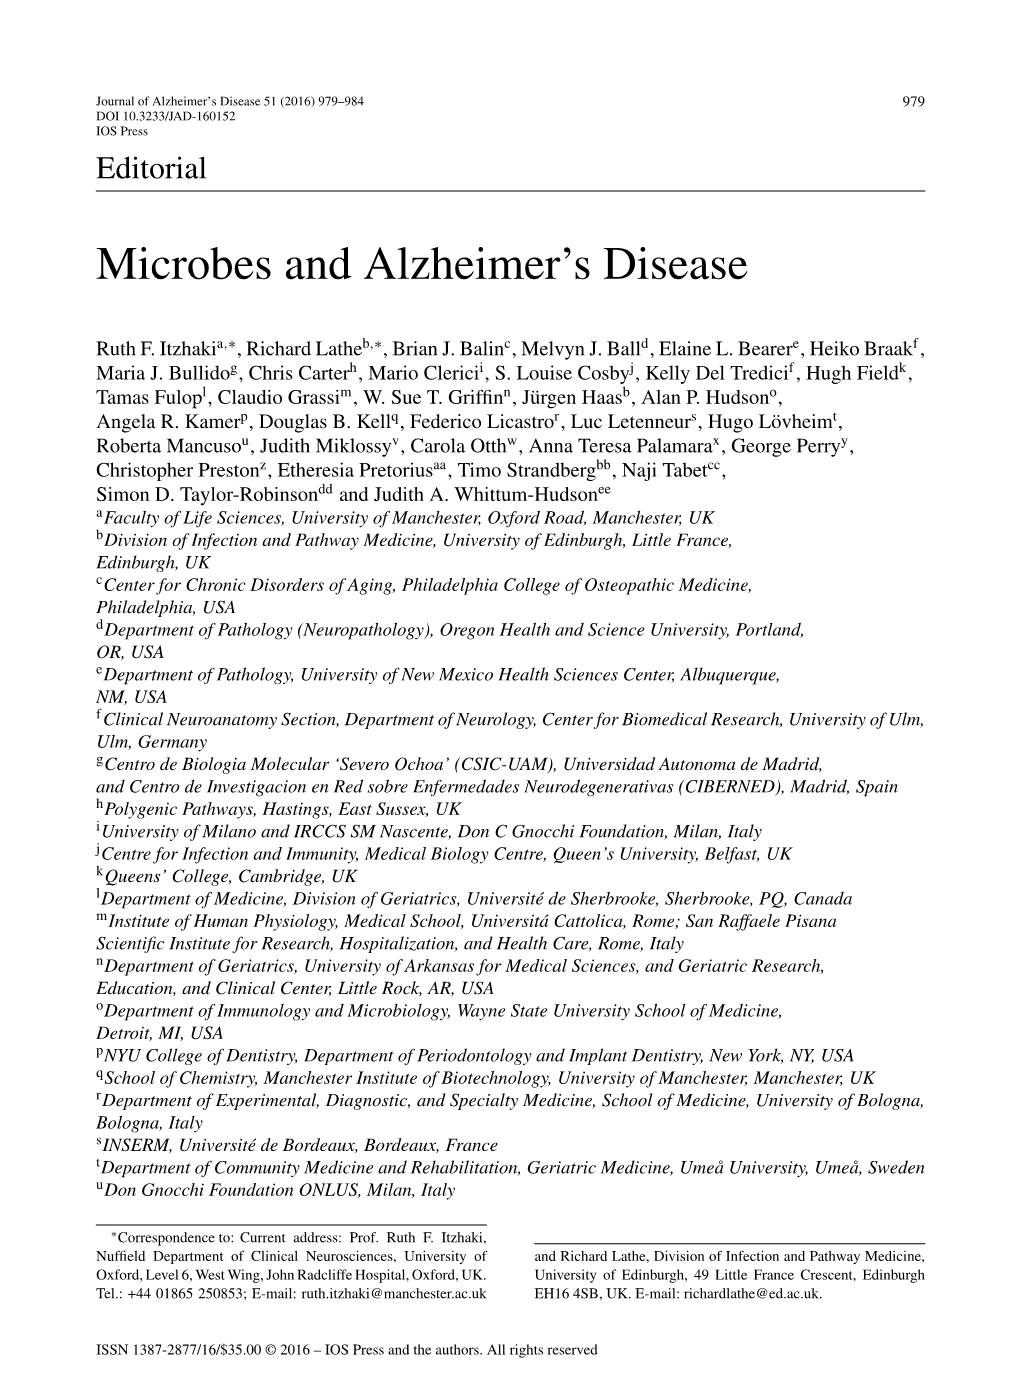 Microbes and Alzheimer's Disease